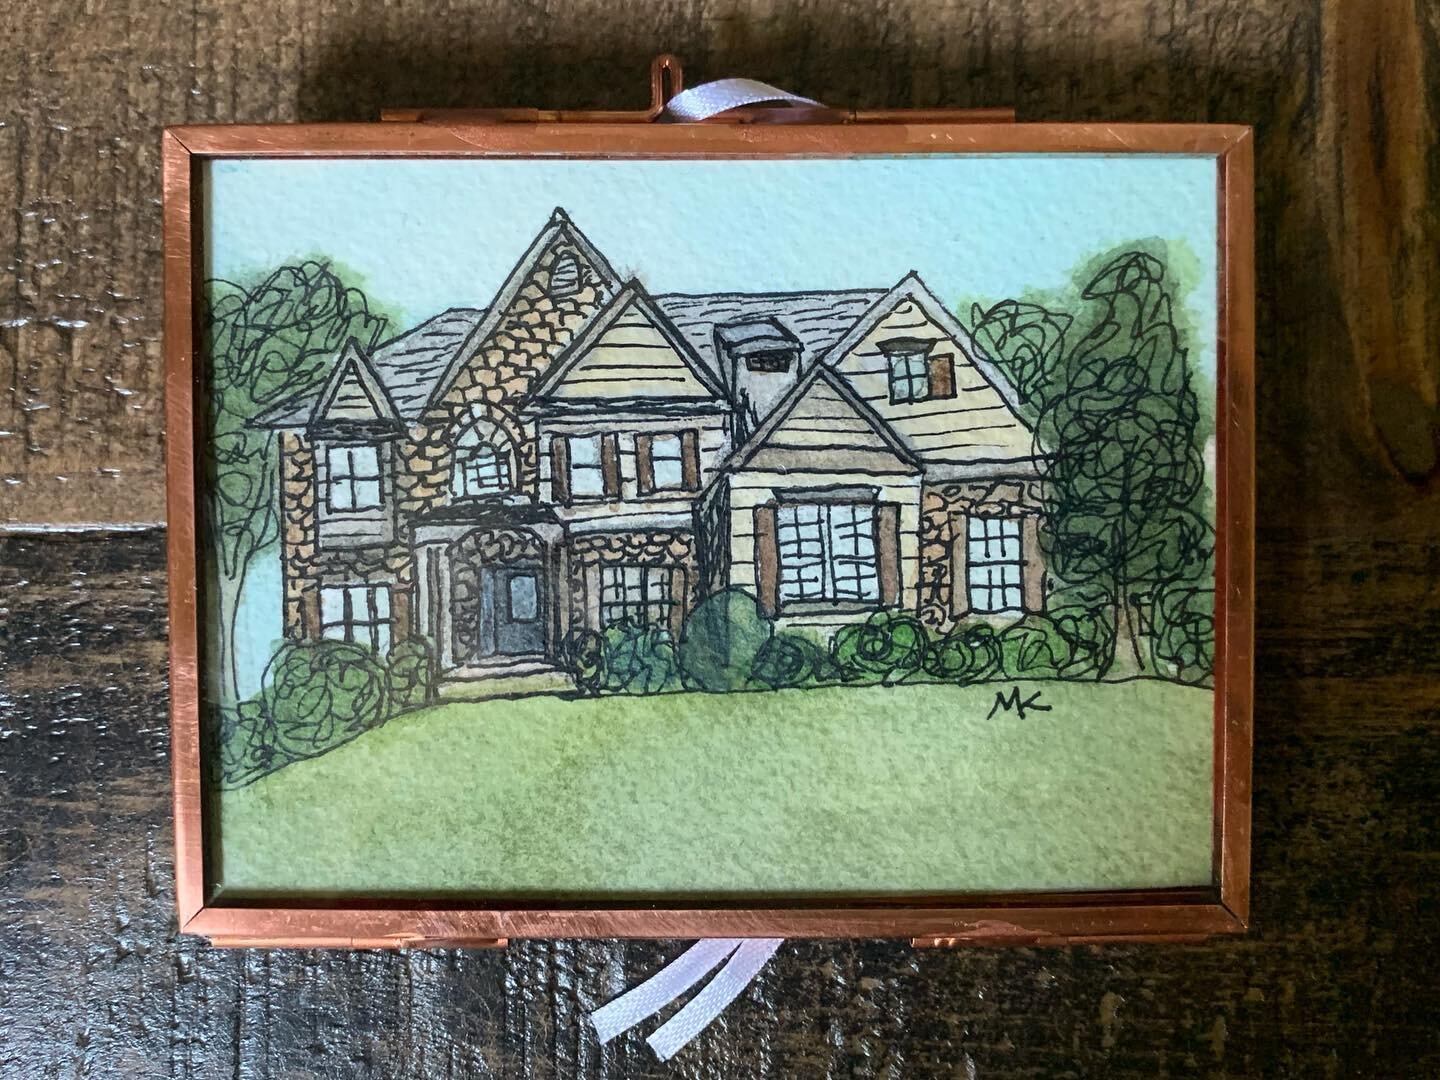 This gorgeous fall weather just gives me all the homey feels. What&rsquo;s your favorite cozy fall activity? #homesweethome #minihouseportrait #houseportrait #watercolorart #chattanoogaartist #fallvibes #customgifts #realtorgifts #weddinggift @megroo